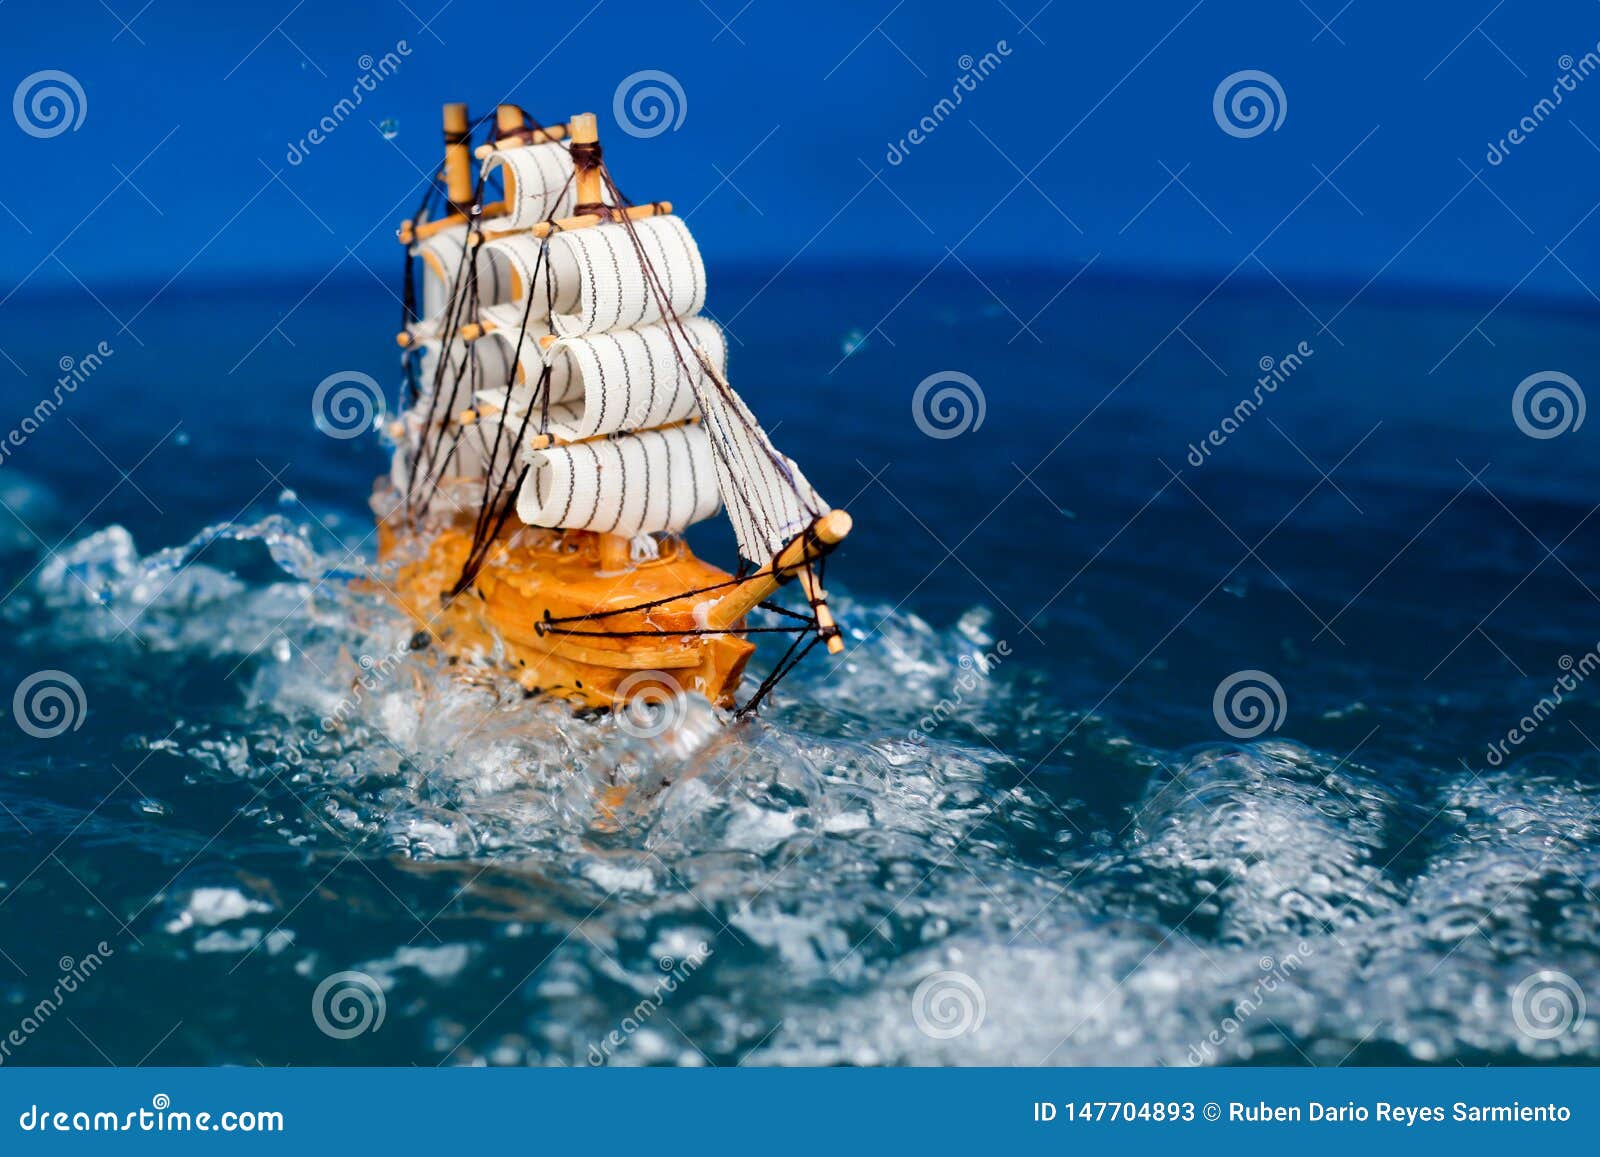 Small Toy Boat In The Water With Big Waves White Wooden 